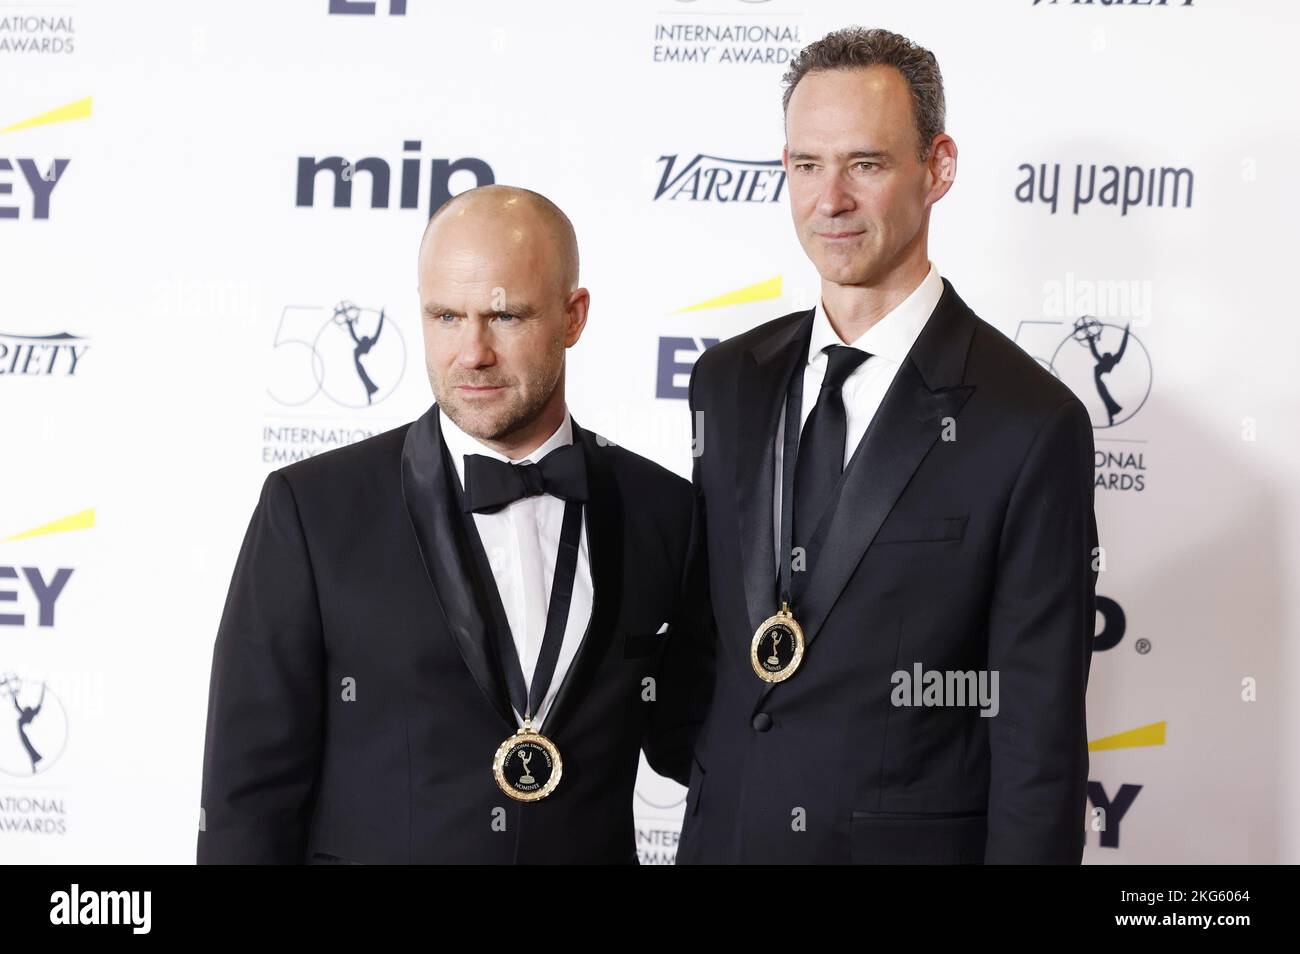 New York, United States. 21st Nov, 2022. Christian Morgan and Aric Noboa arrive on the red carpet at the 50th International Emmy Awards at Casa Cipriani in New York City on Monday, November 21, 2022. Photo by John Angelillo/UPI Credit: UPI/Alamy Live News Stock Photo